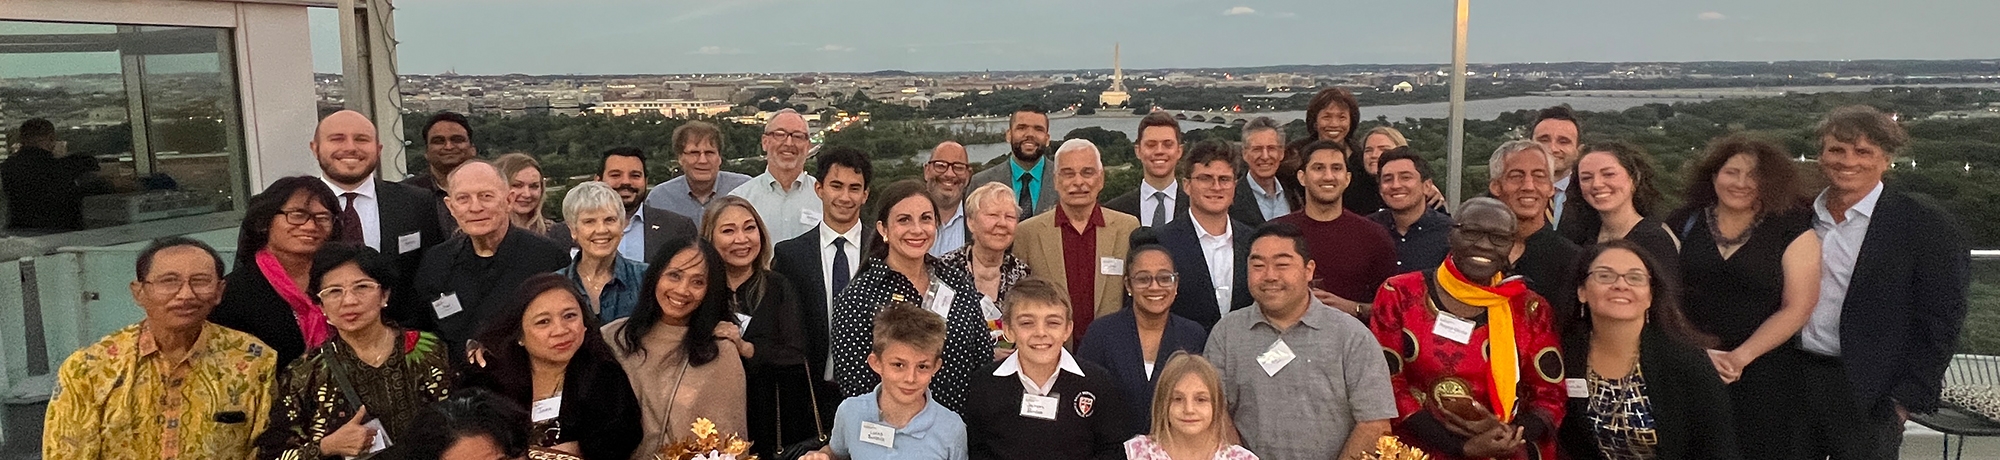 The group of attendees, association representatives, and Santi Budaya dancers wearing traditional Indonesian attire posing for a group photo on the rooftop of Top of the Town with the Potomac River and Capitol building visible in the background.